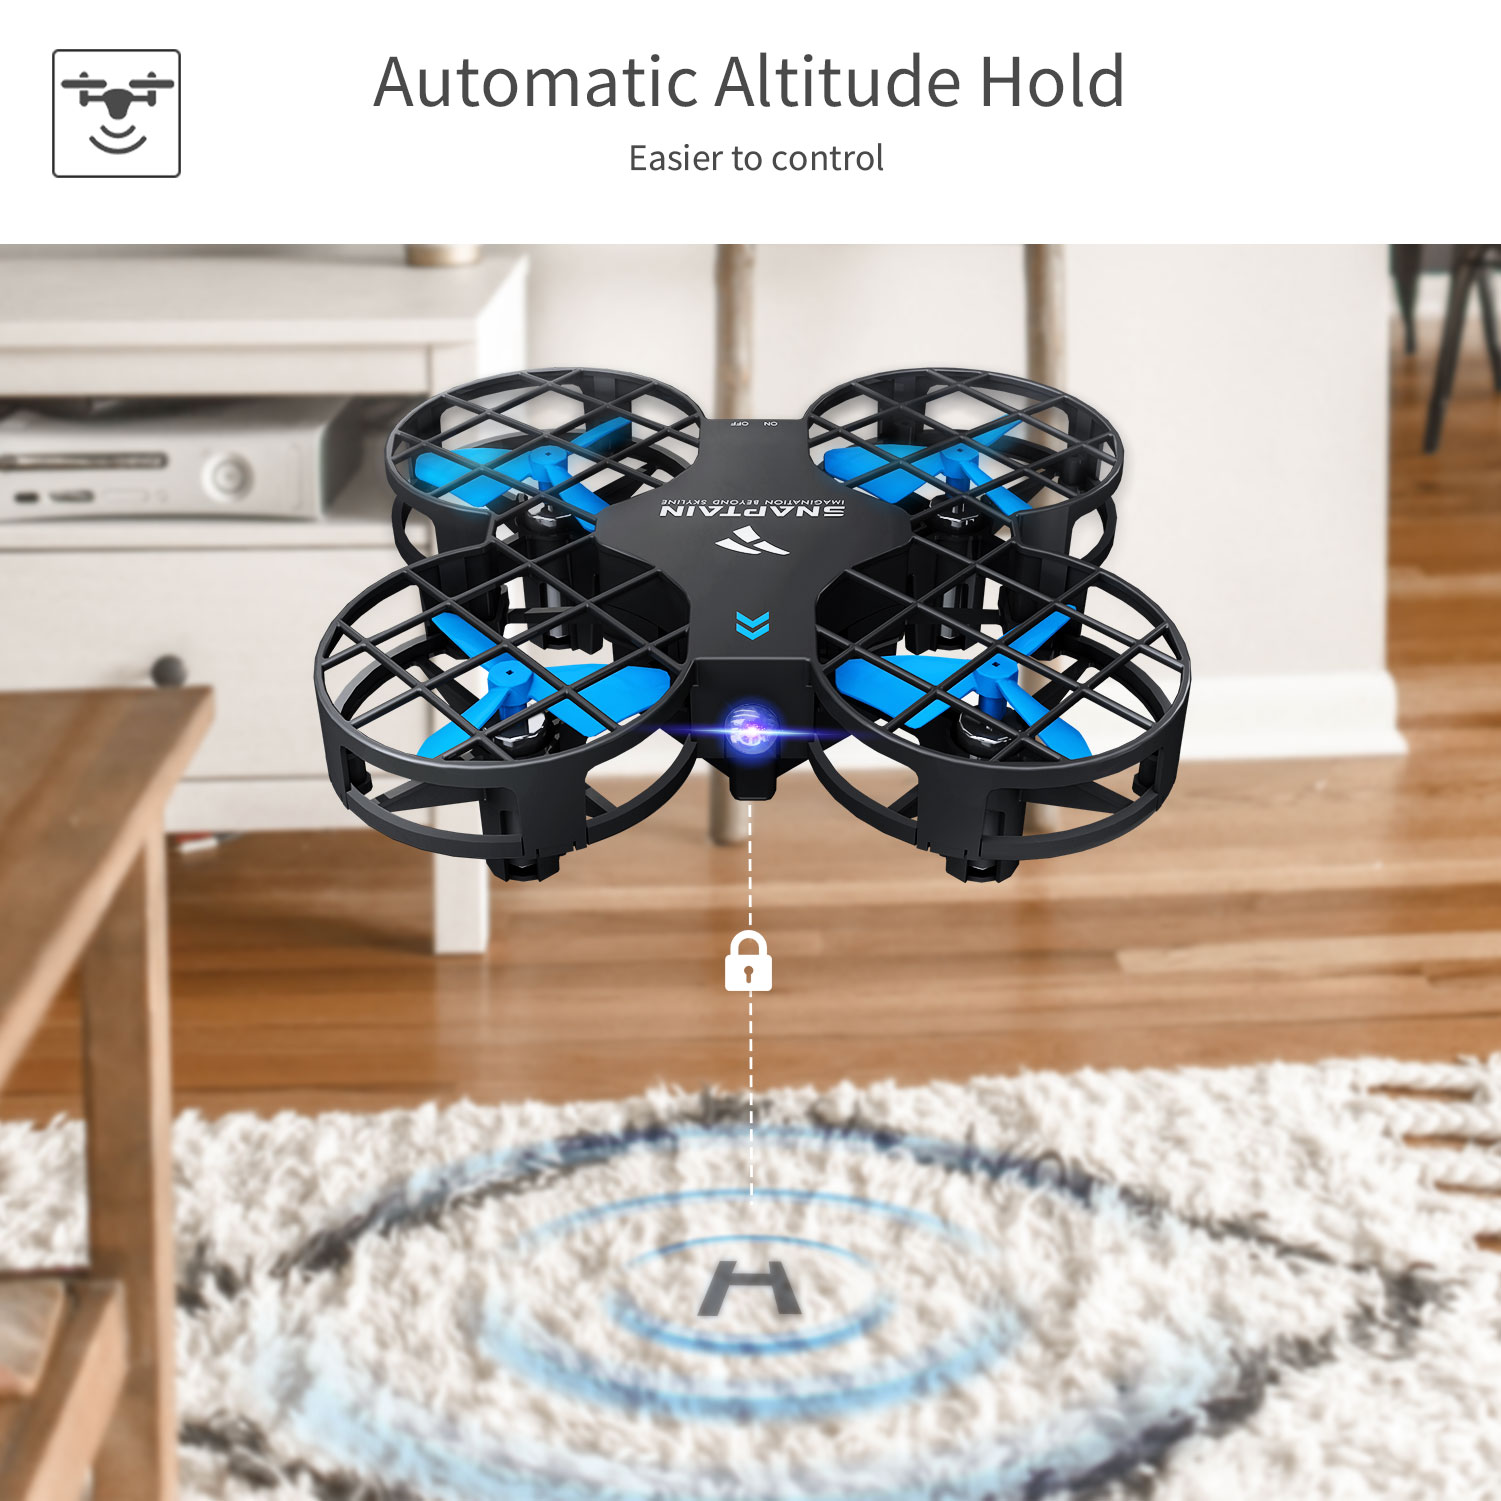 Snaptain H823H Mini Drone for Kids, Radio Control Quadcopter for Beginners with Altitude Hold, Headless Mode, 3D Flips, One Key Return and Speed Adjustment - image 4 of 11